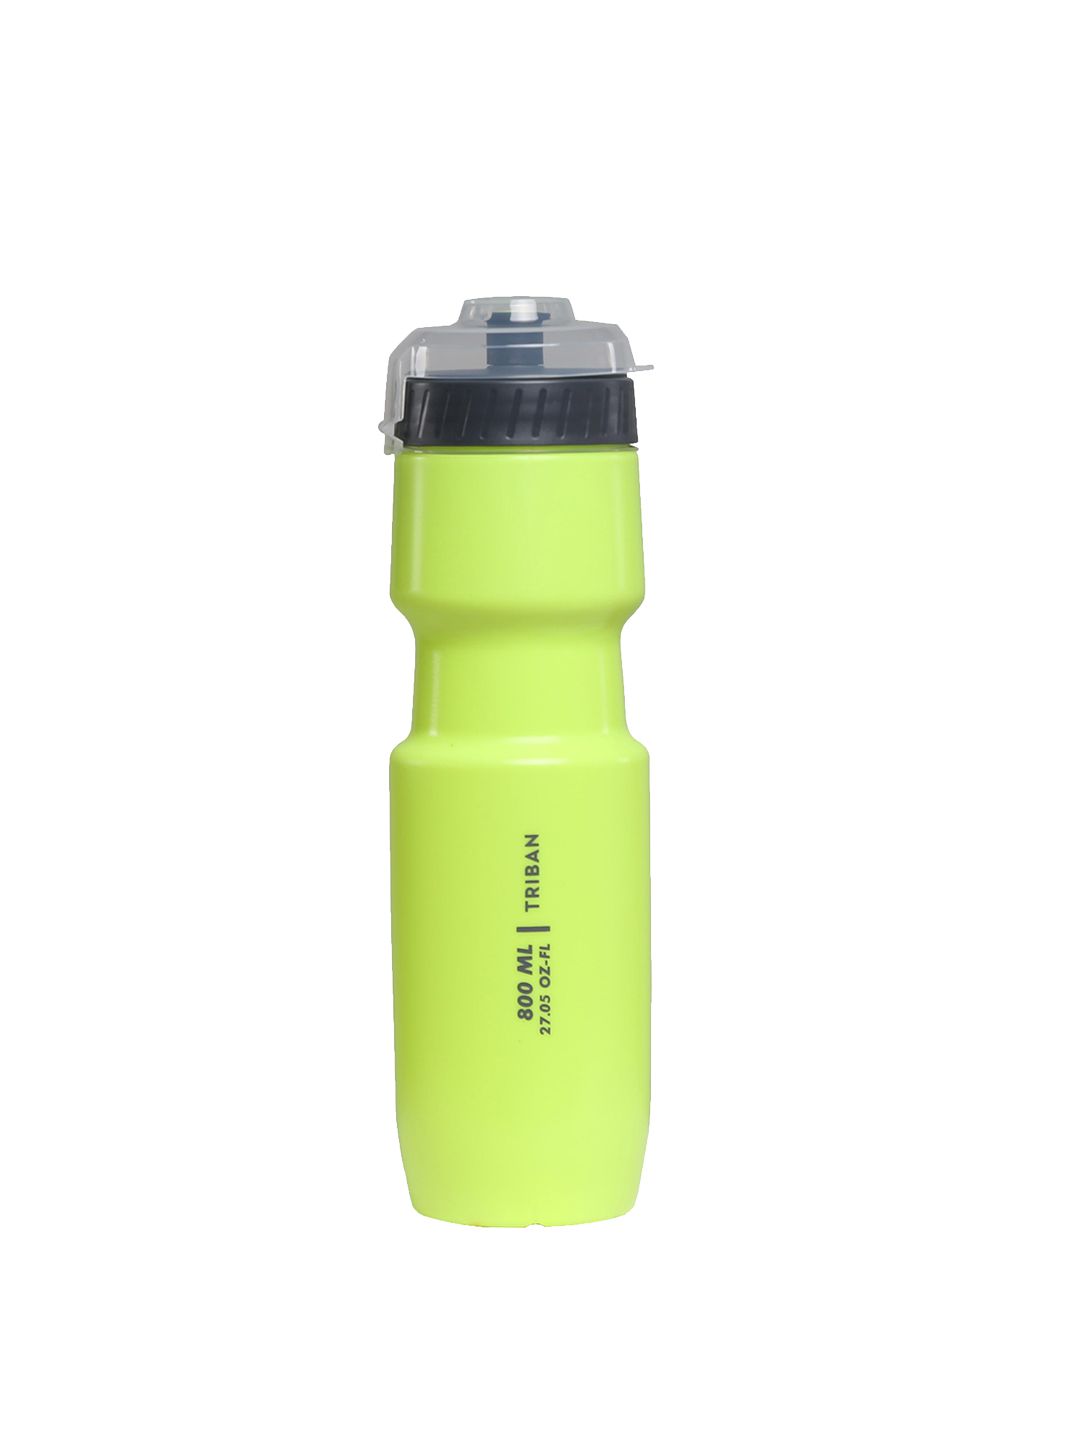 TRIBAN By Decathlon Fluorescent Green Cycling Bottle 800ml Price in India